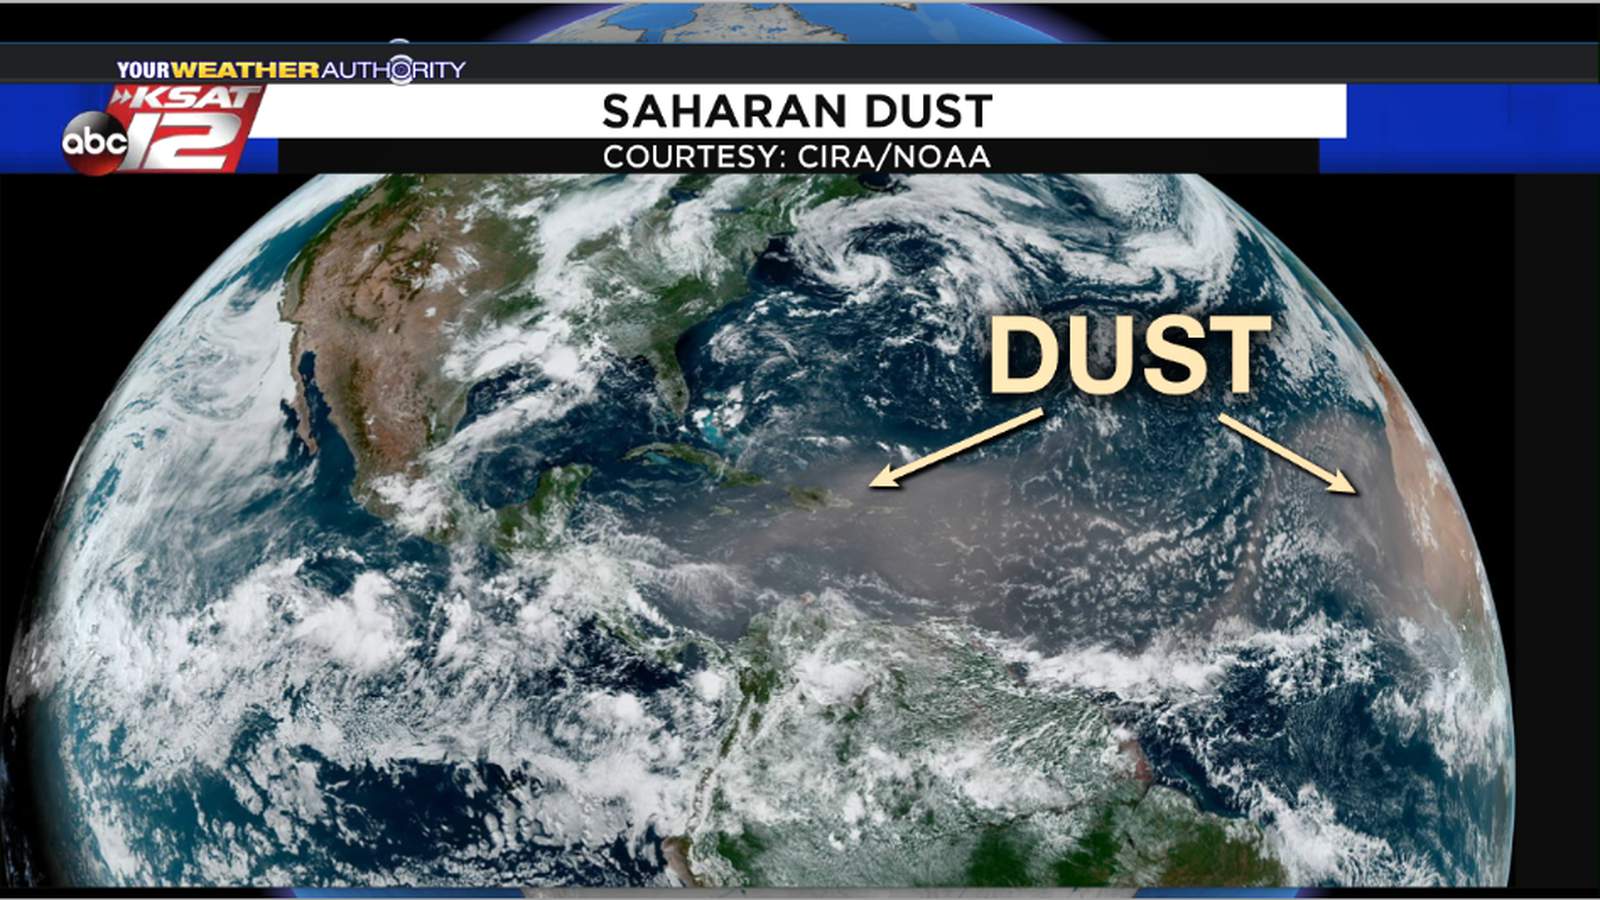 Summer months bring times of Saharan dust to Texas